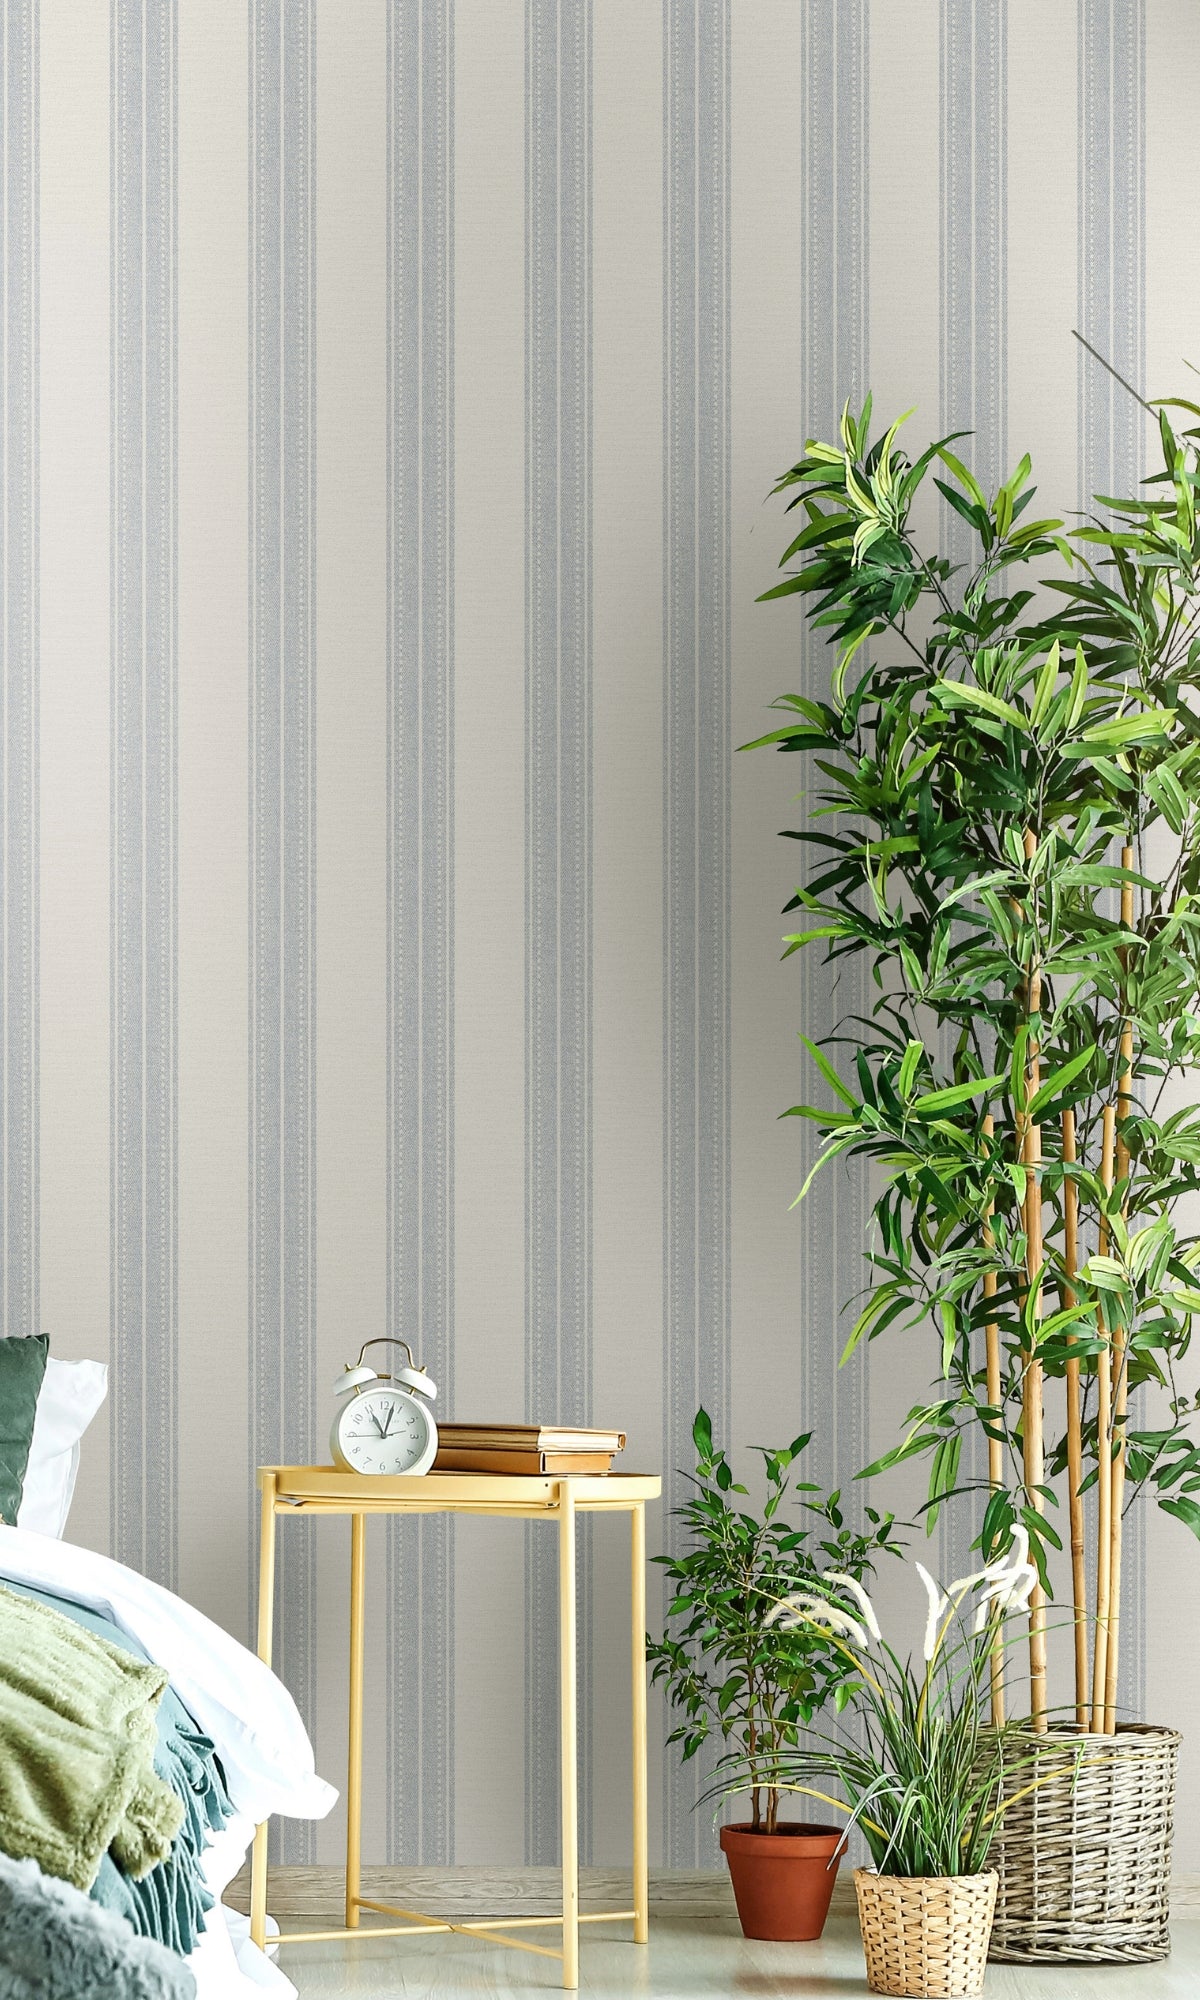 Blue Woven Fabric Inspired Stripes Wallpaper R8815